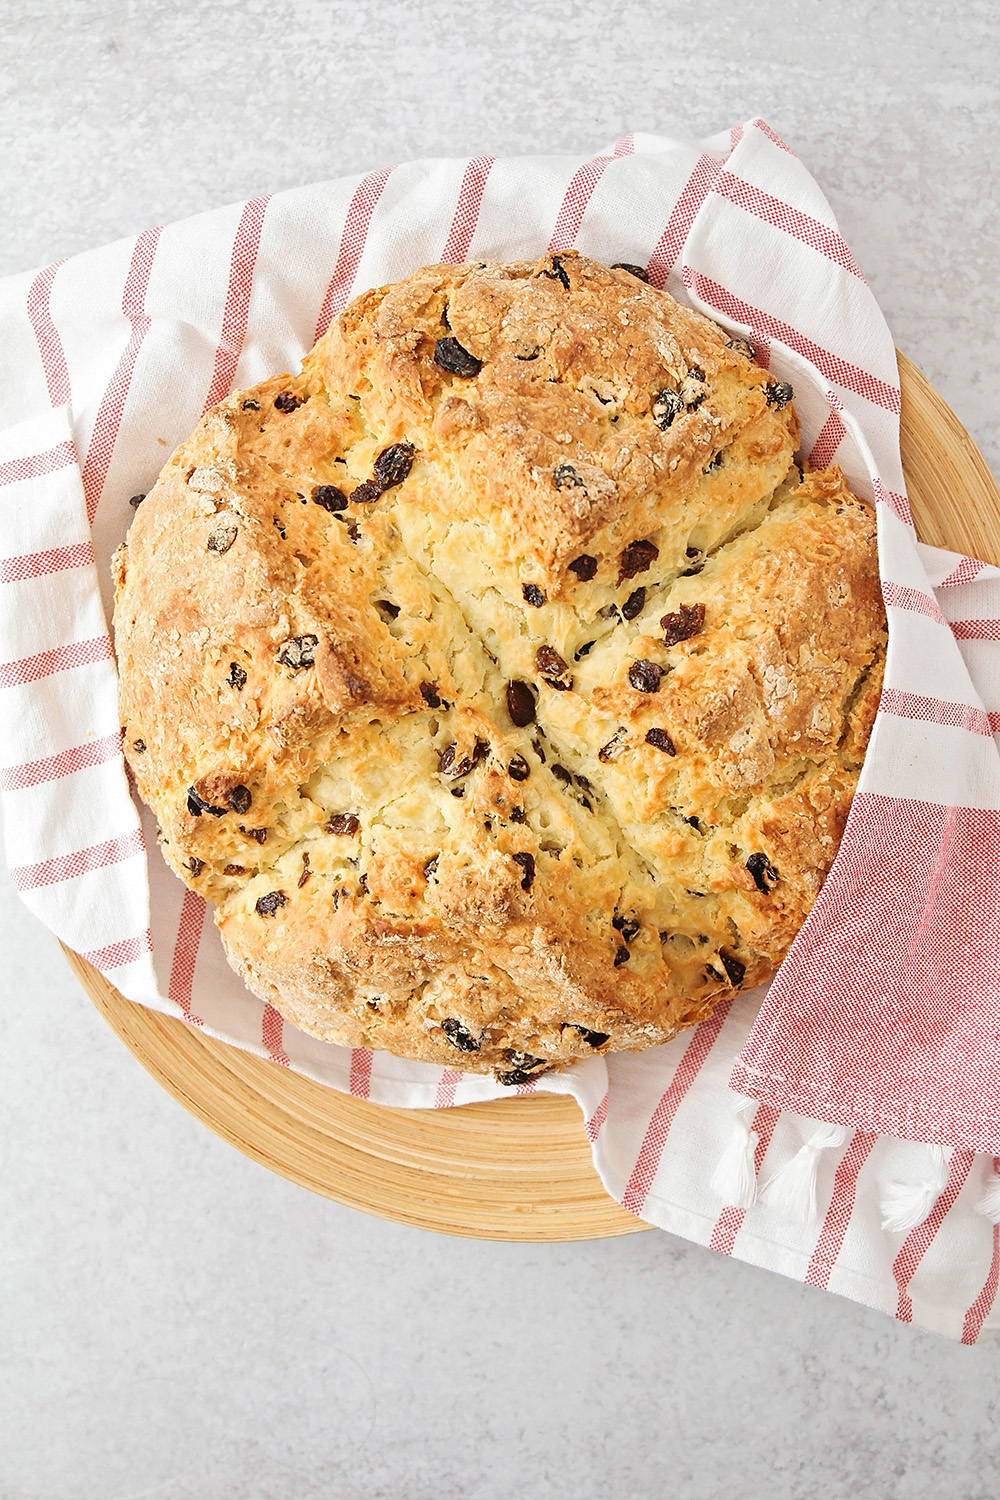 This Irish soda bread is simple and easy to make, and so delicious! It has the perfect tender crumb and light texture.